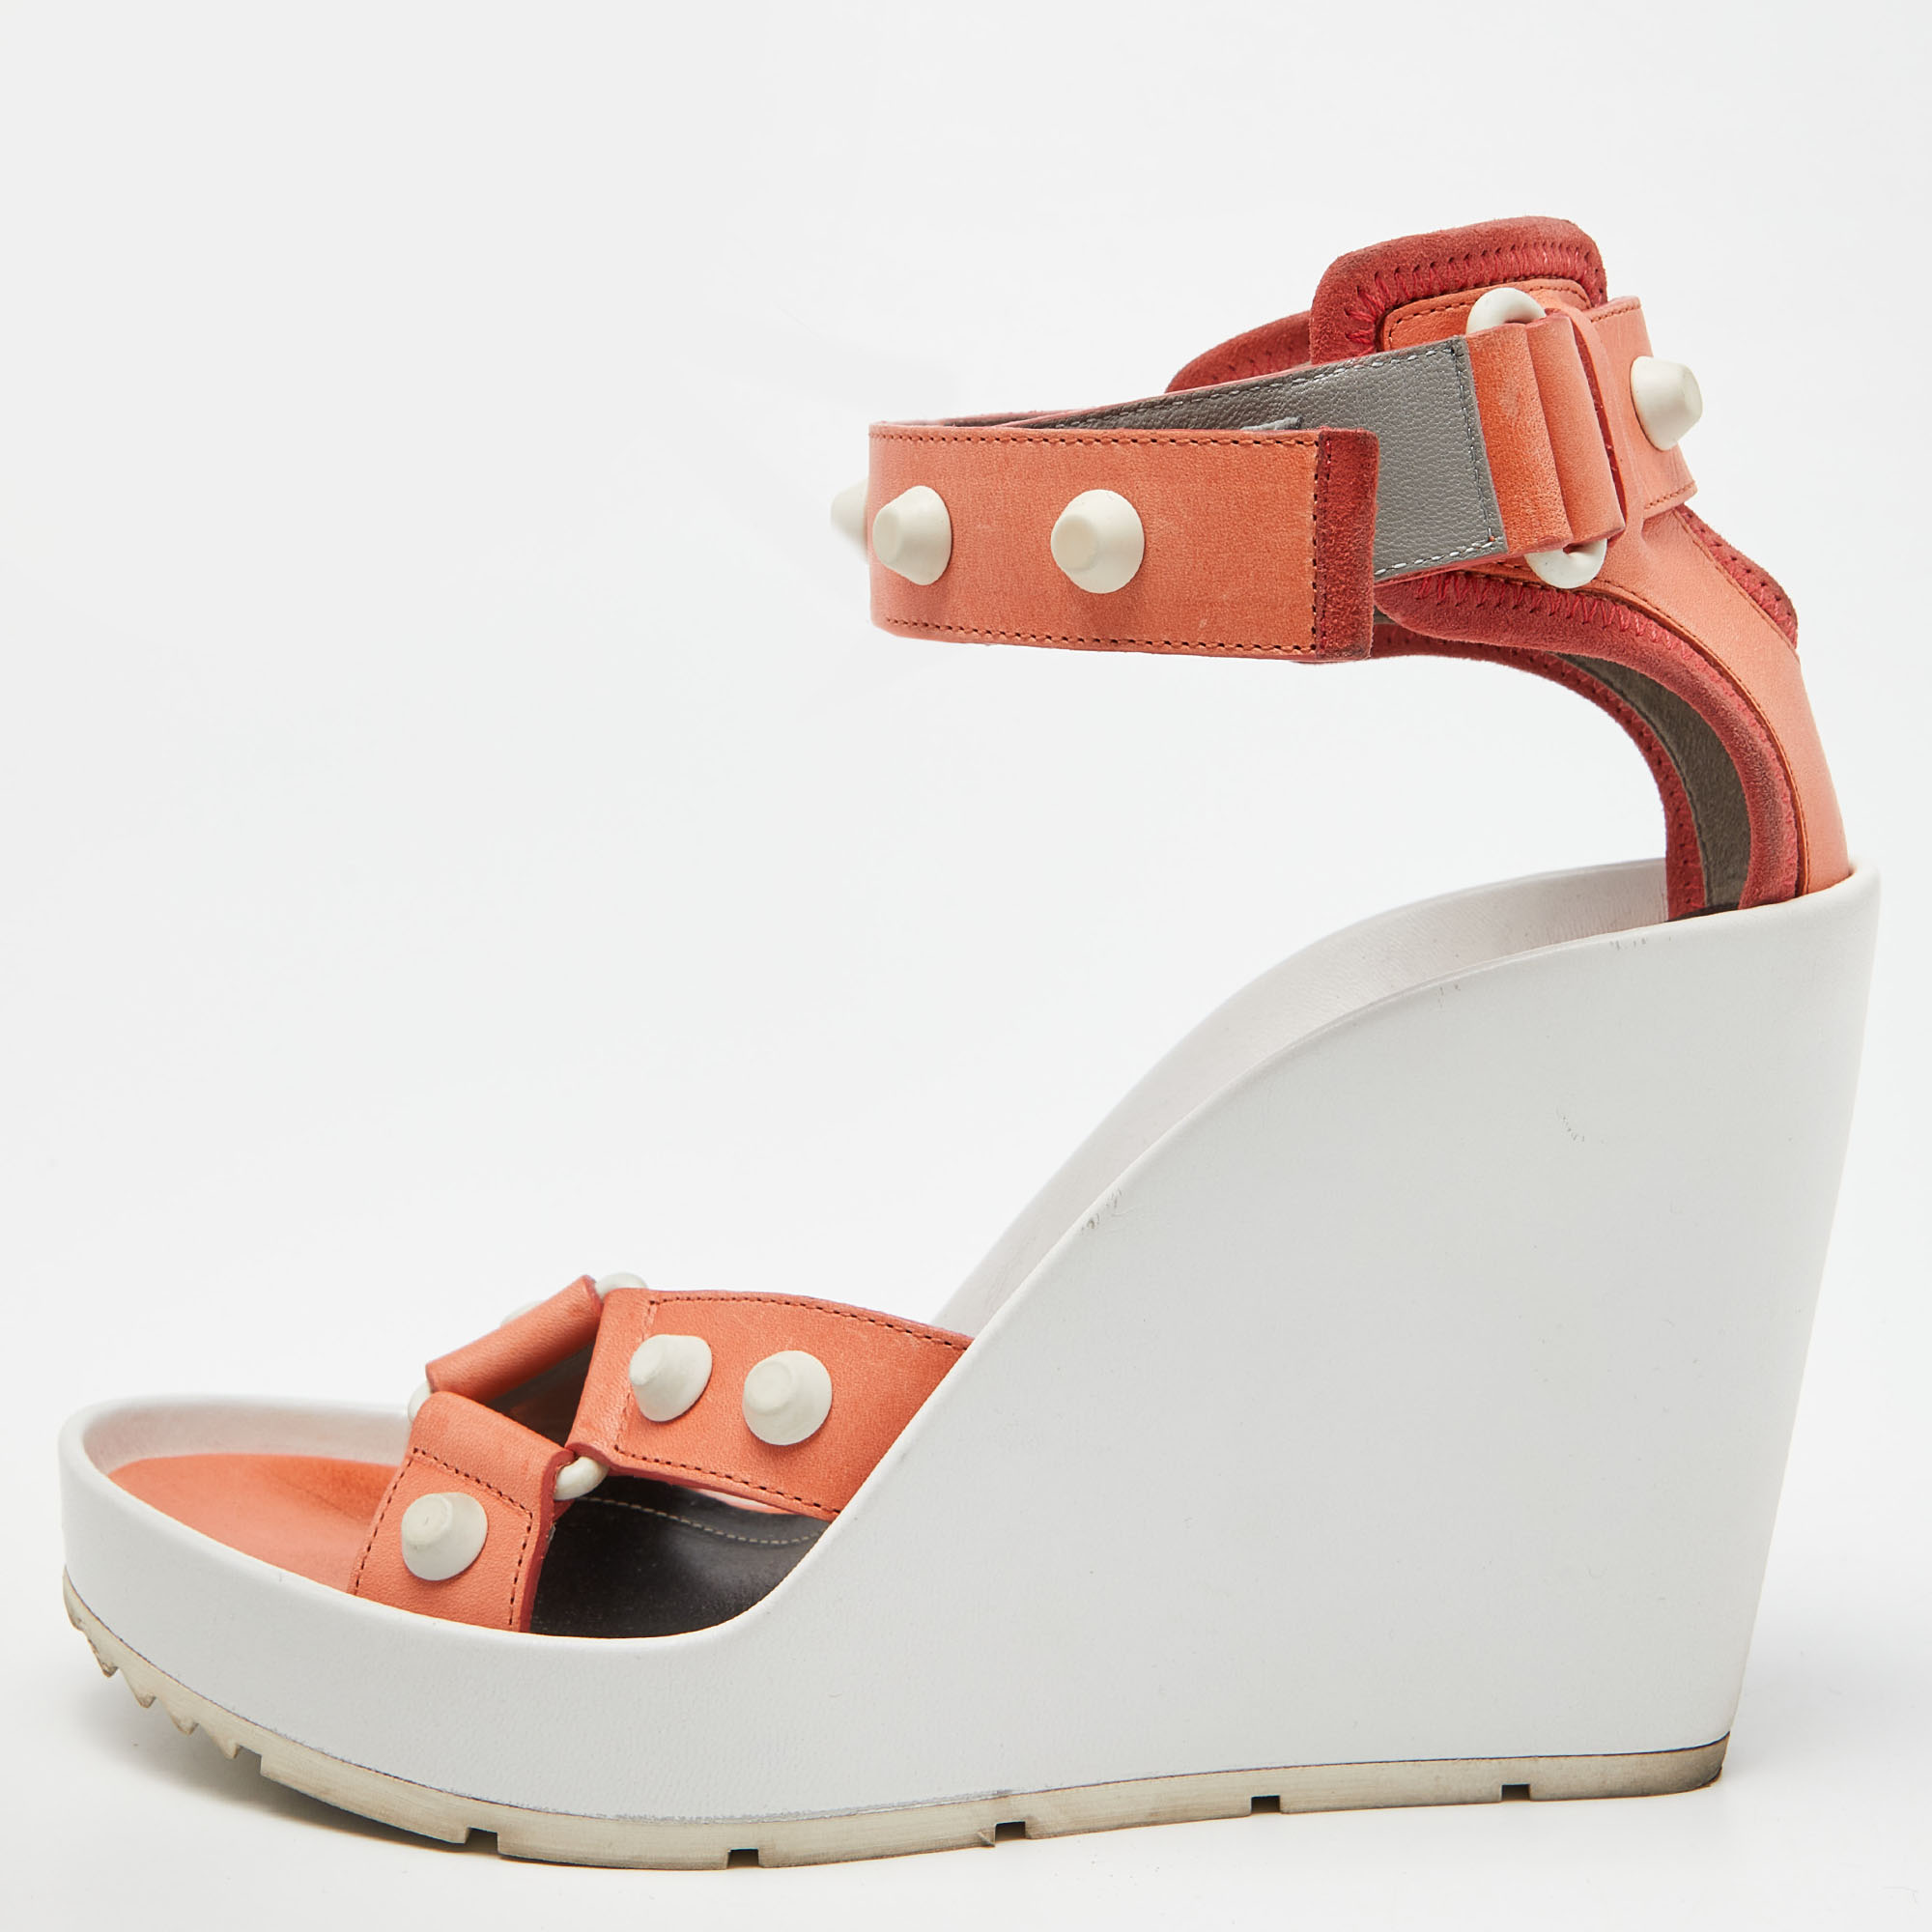 Pre-owned Balenciaga Orange/white Leather Studded Wedge Ankle Cuff Sandals Size 37